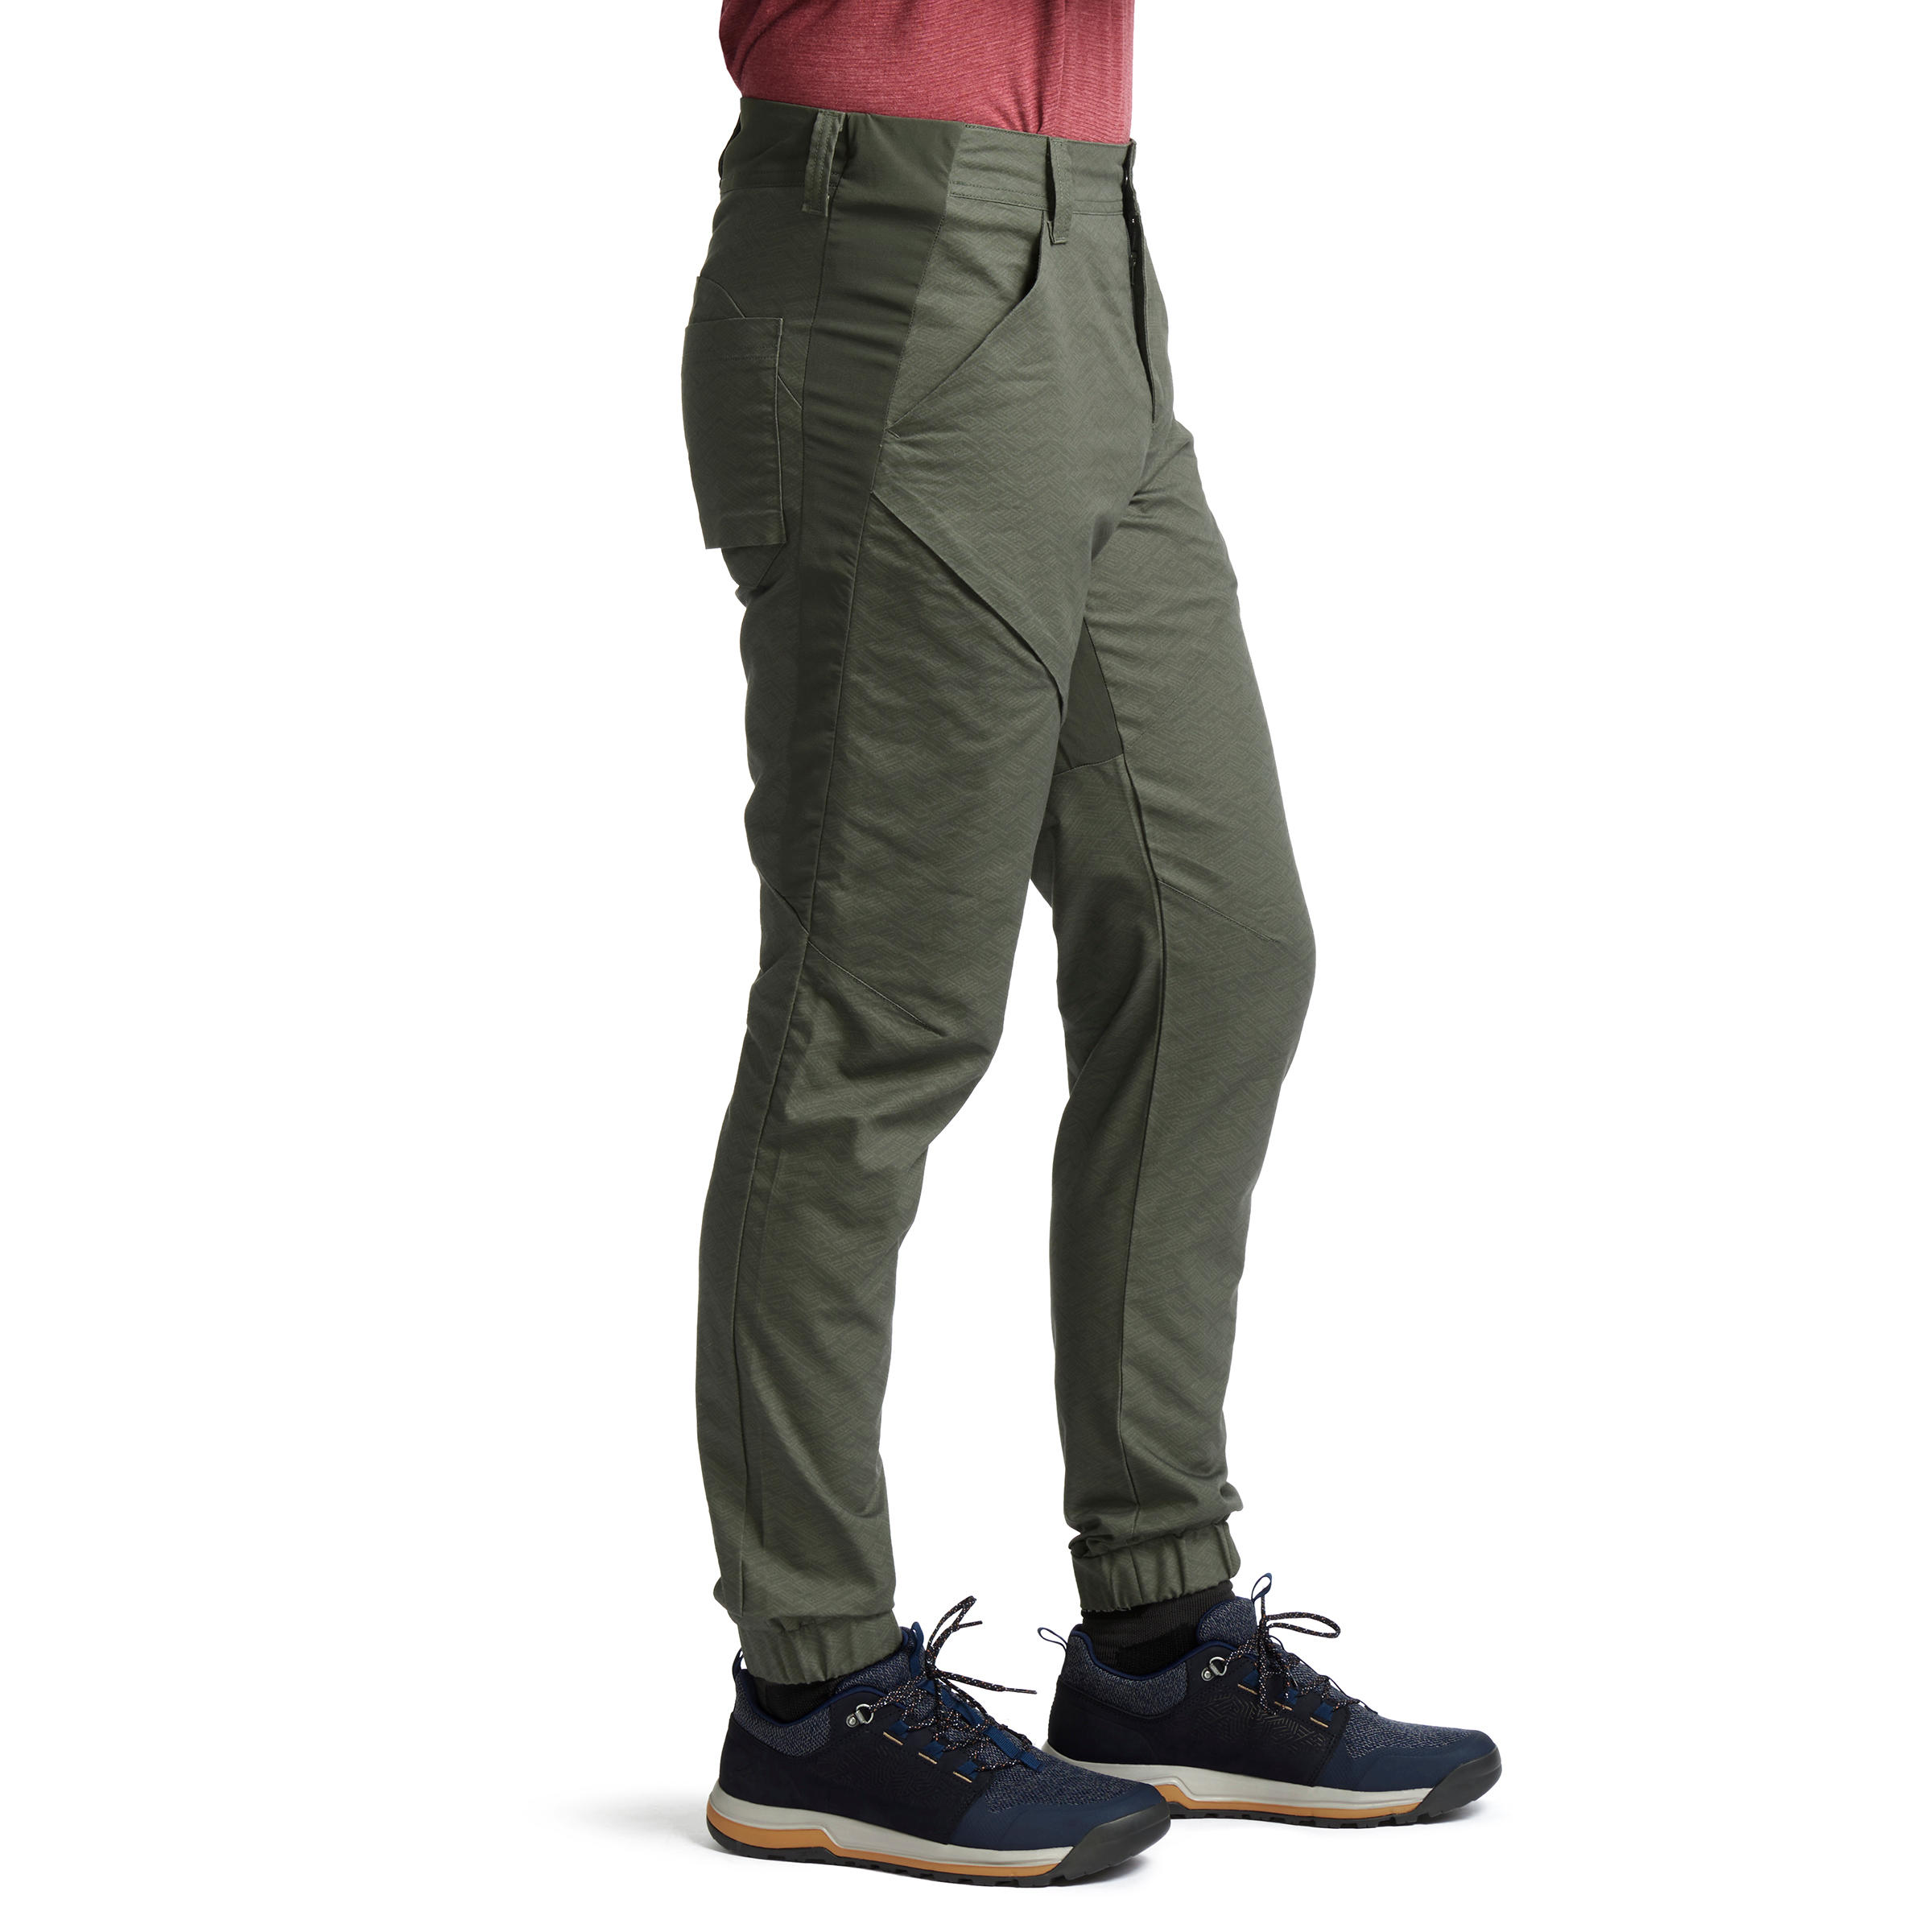 skpabo Men's Work Trousers Outdoor Hiking Walking Trousers Lightweight Thin  Quick Dry Pants with Zipper Pockets - Walmart.com